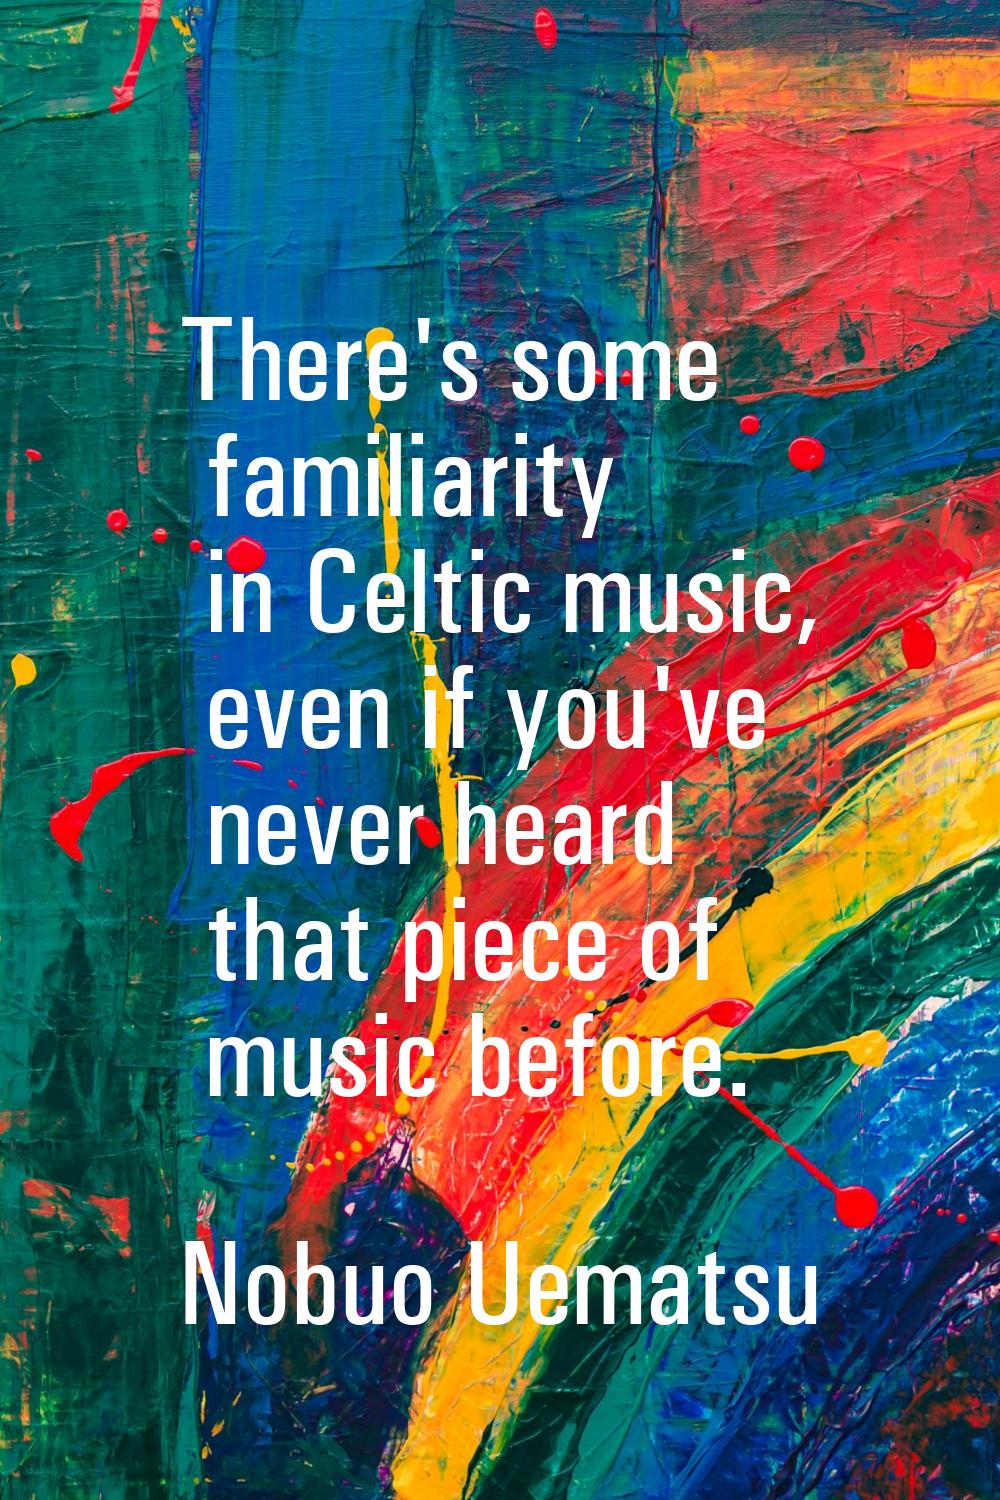 There's some familiarity in Celtic music, even if you've never heard that piece of music before.